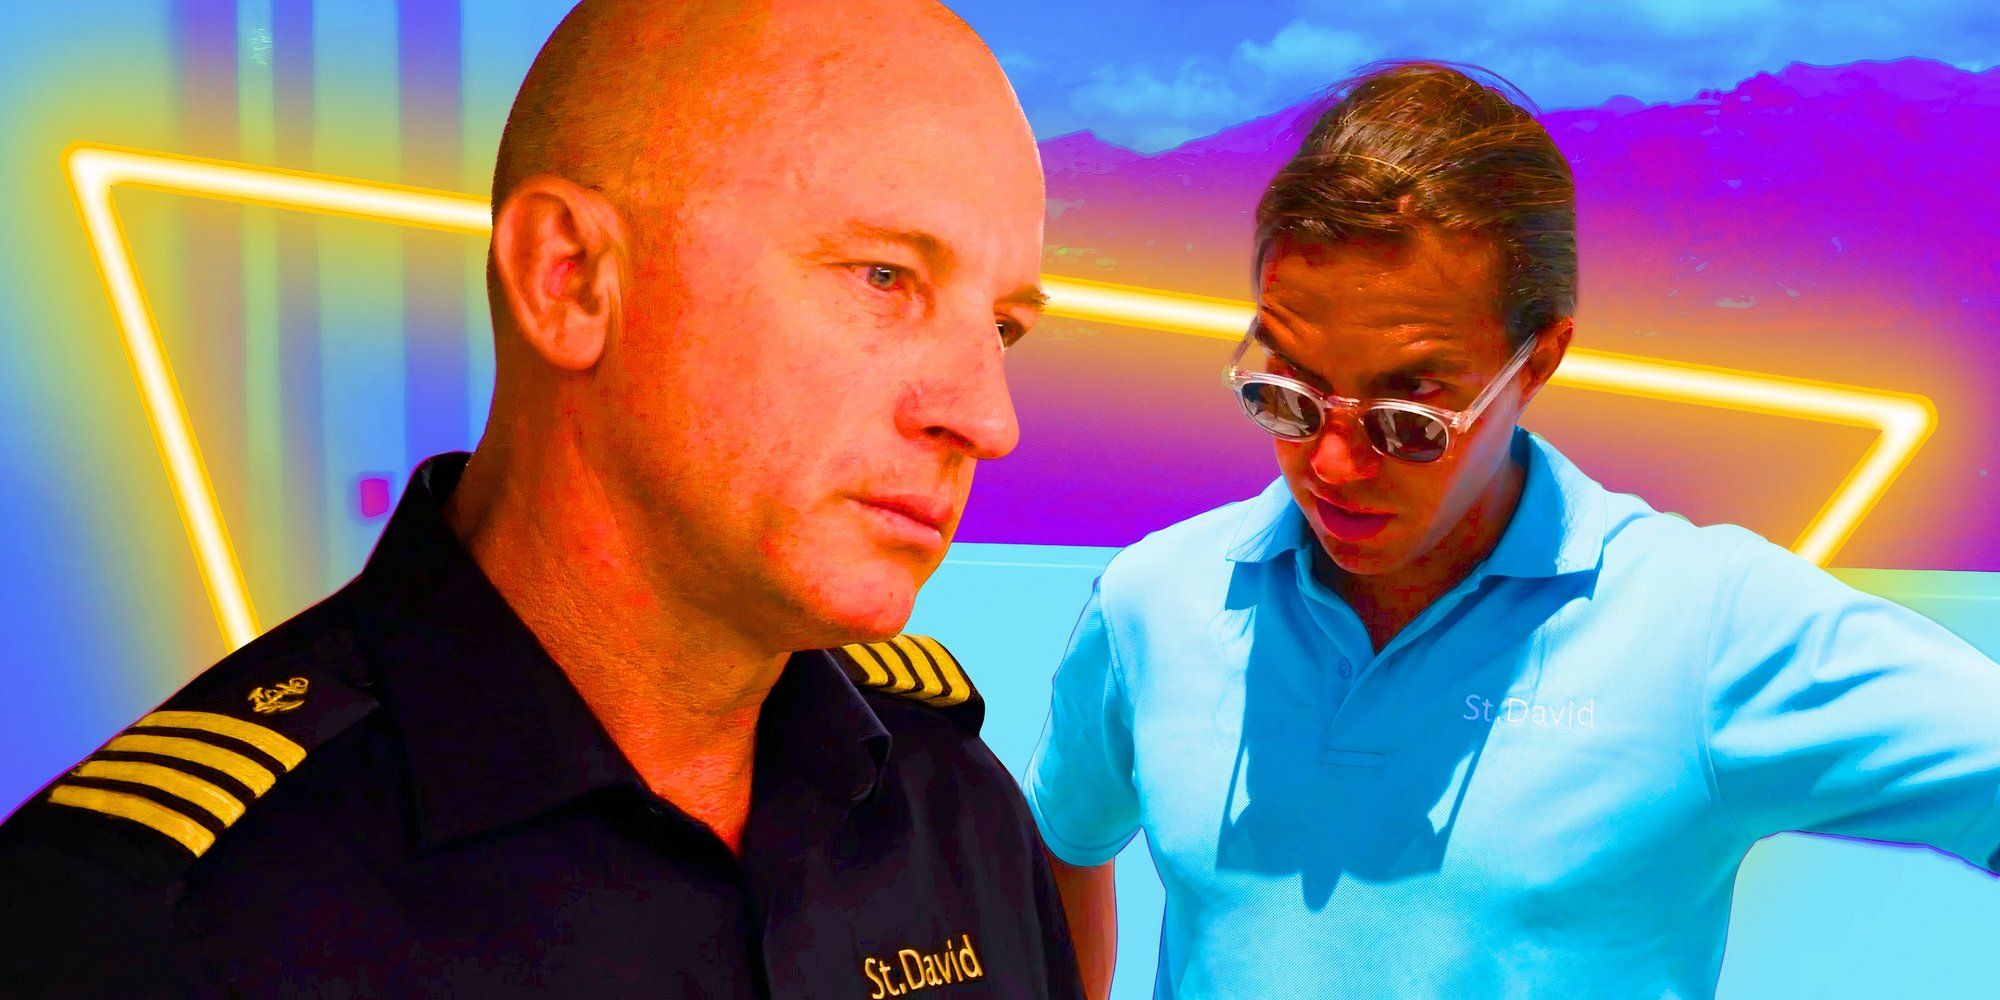 Below Deck's Captain Kerry Titheradge has a serious expression, and Ben Willoughby looks down while wearing his sunglasses.